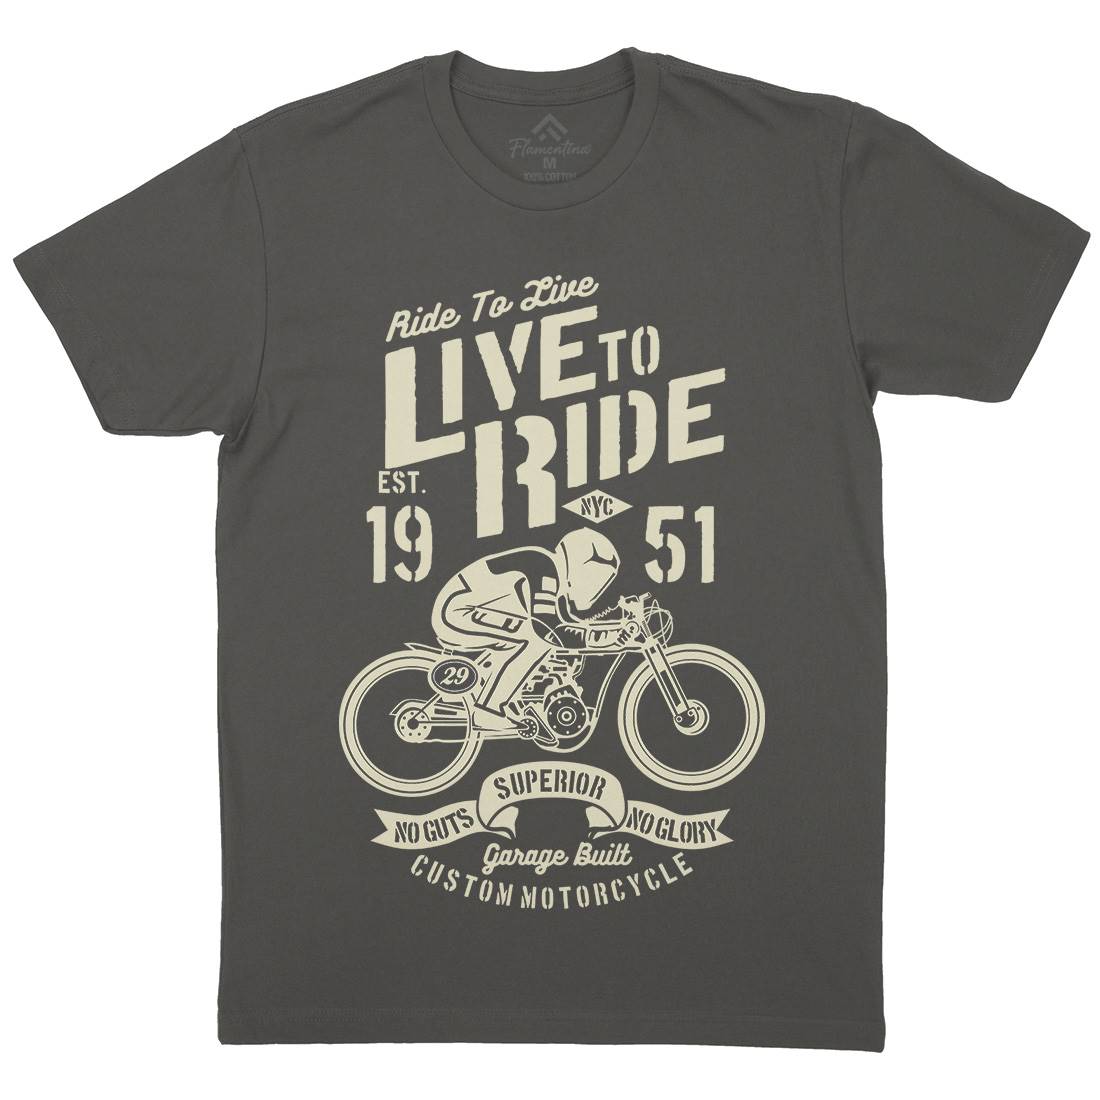 Live To Ride Mens Crew Neck T-Shirt Motorcycles B227